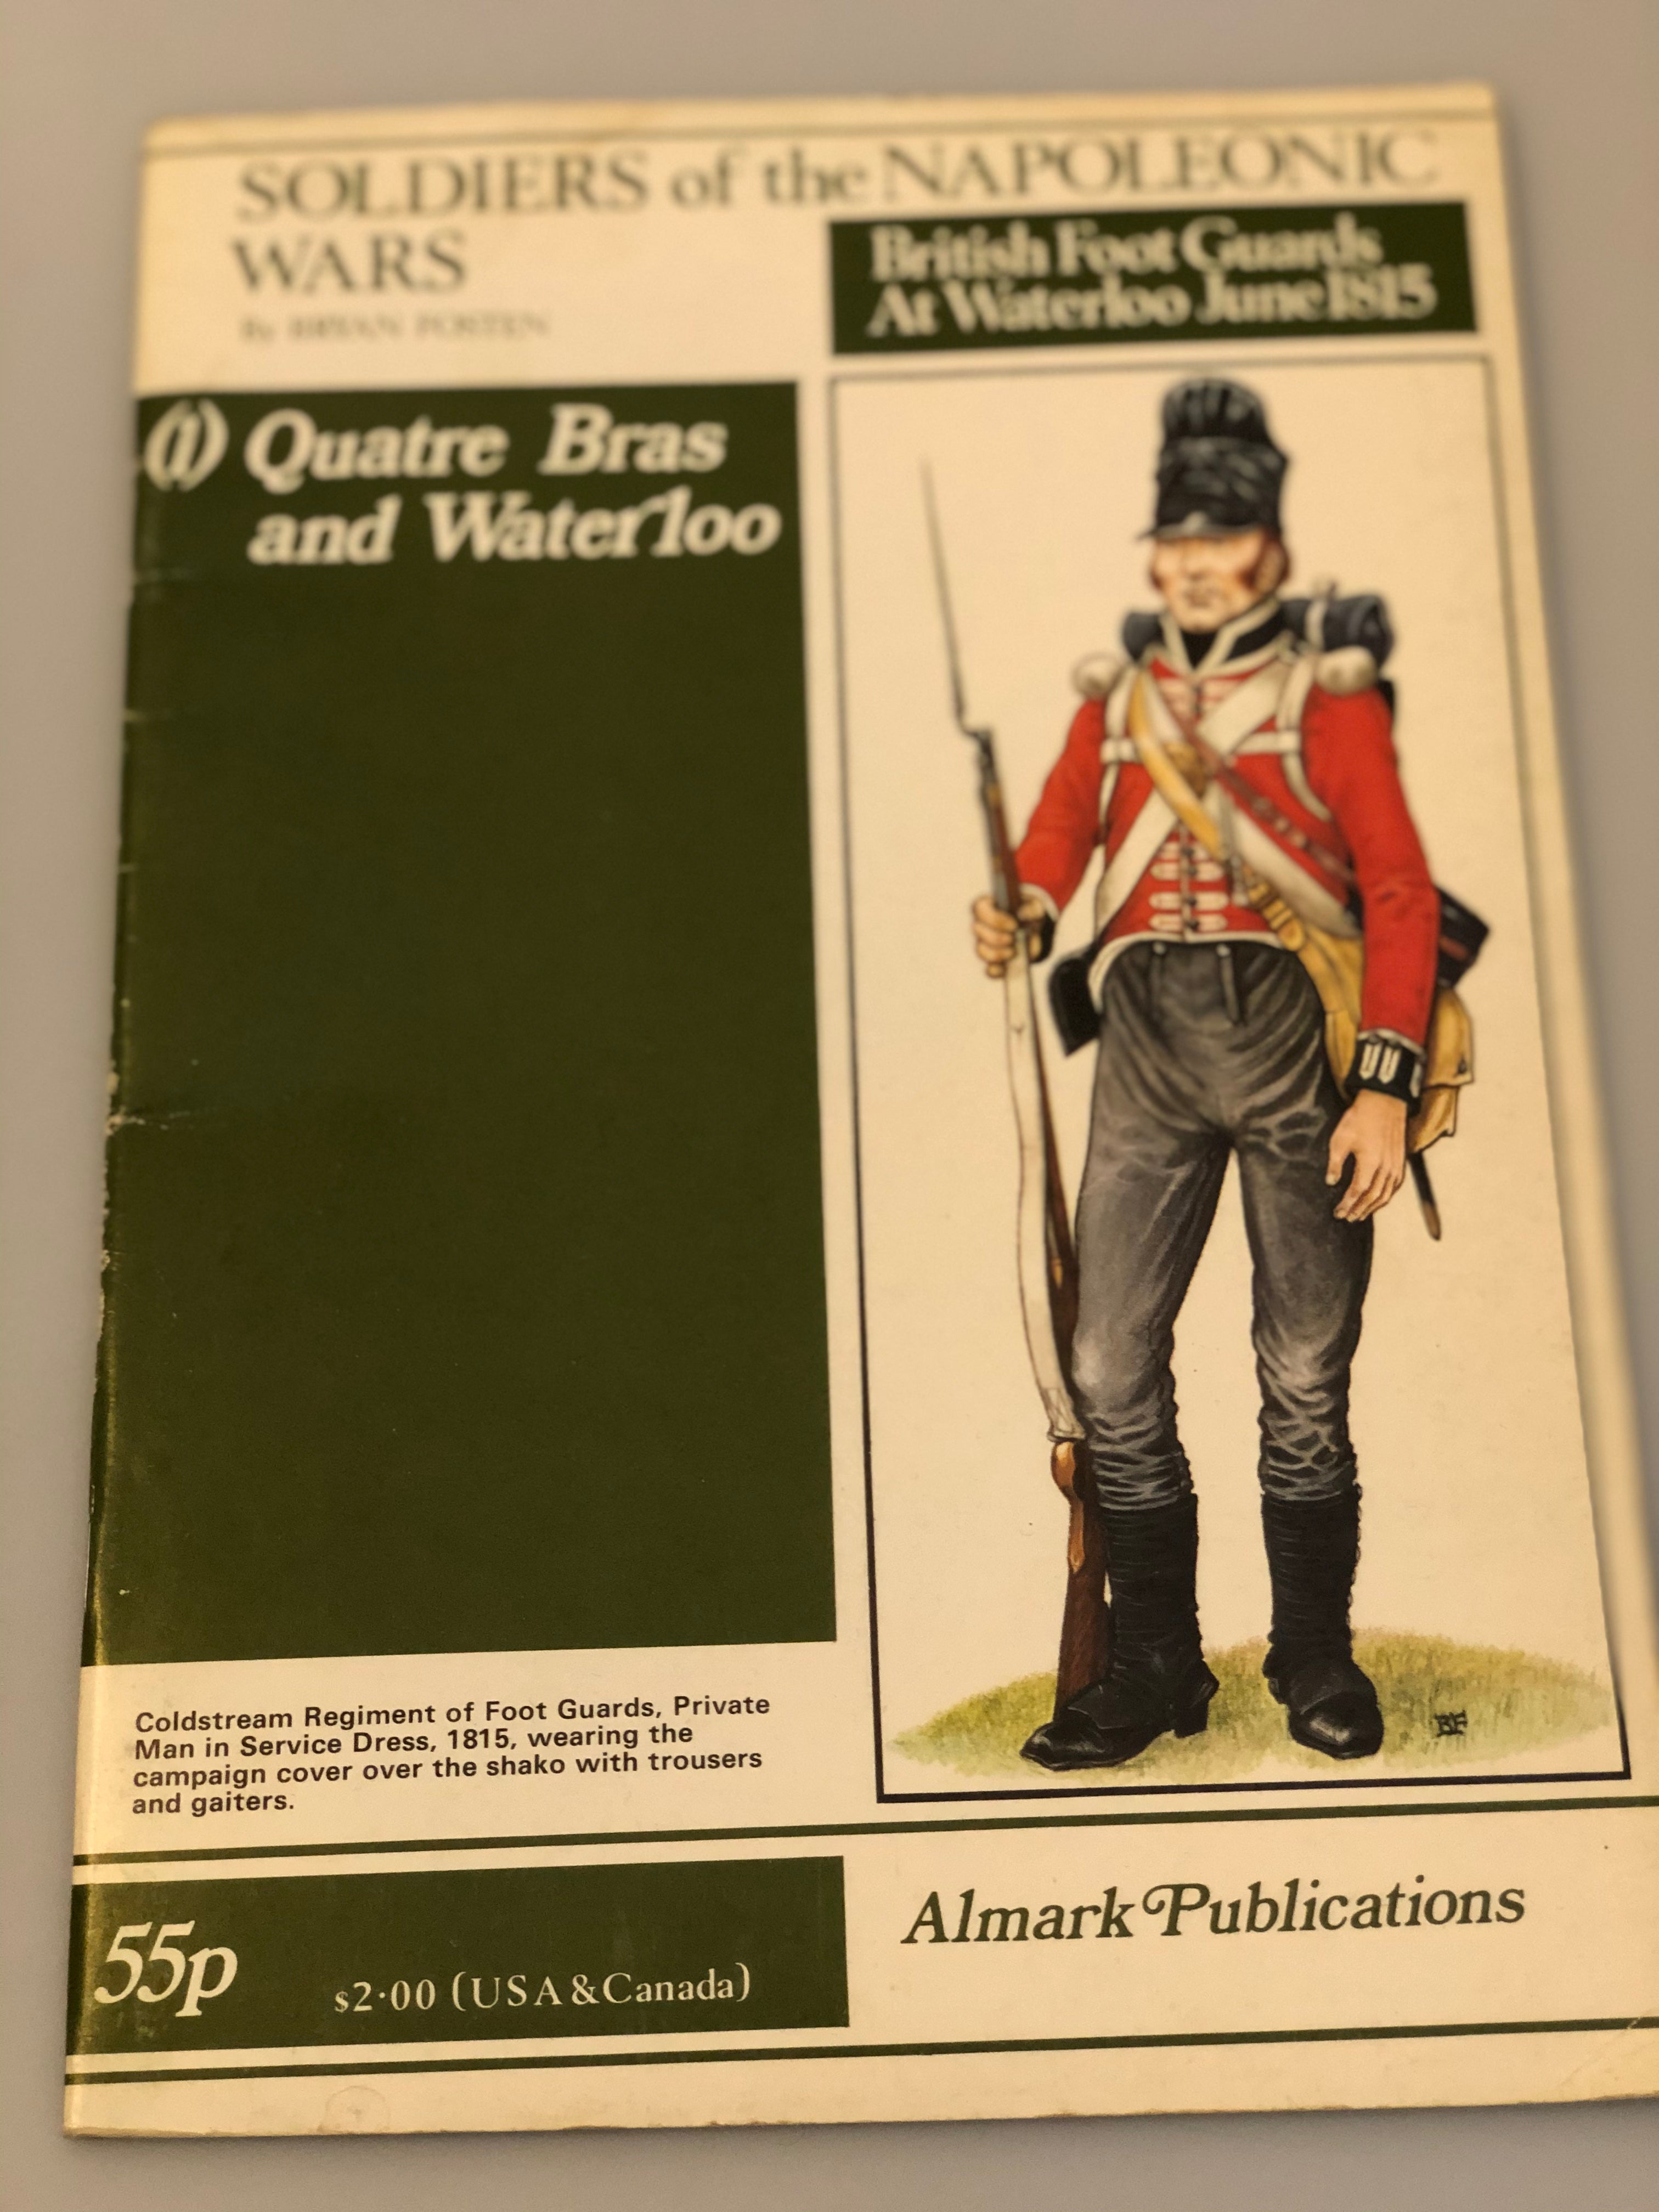 Almark Publications Soldiers of the Napoleonic Wars by Bryan Fosten (1) Quatre Bras and Waterloo (Box 3) ALMSNW1